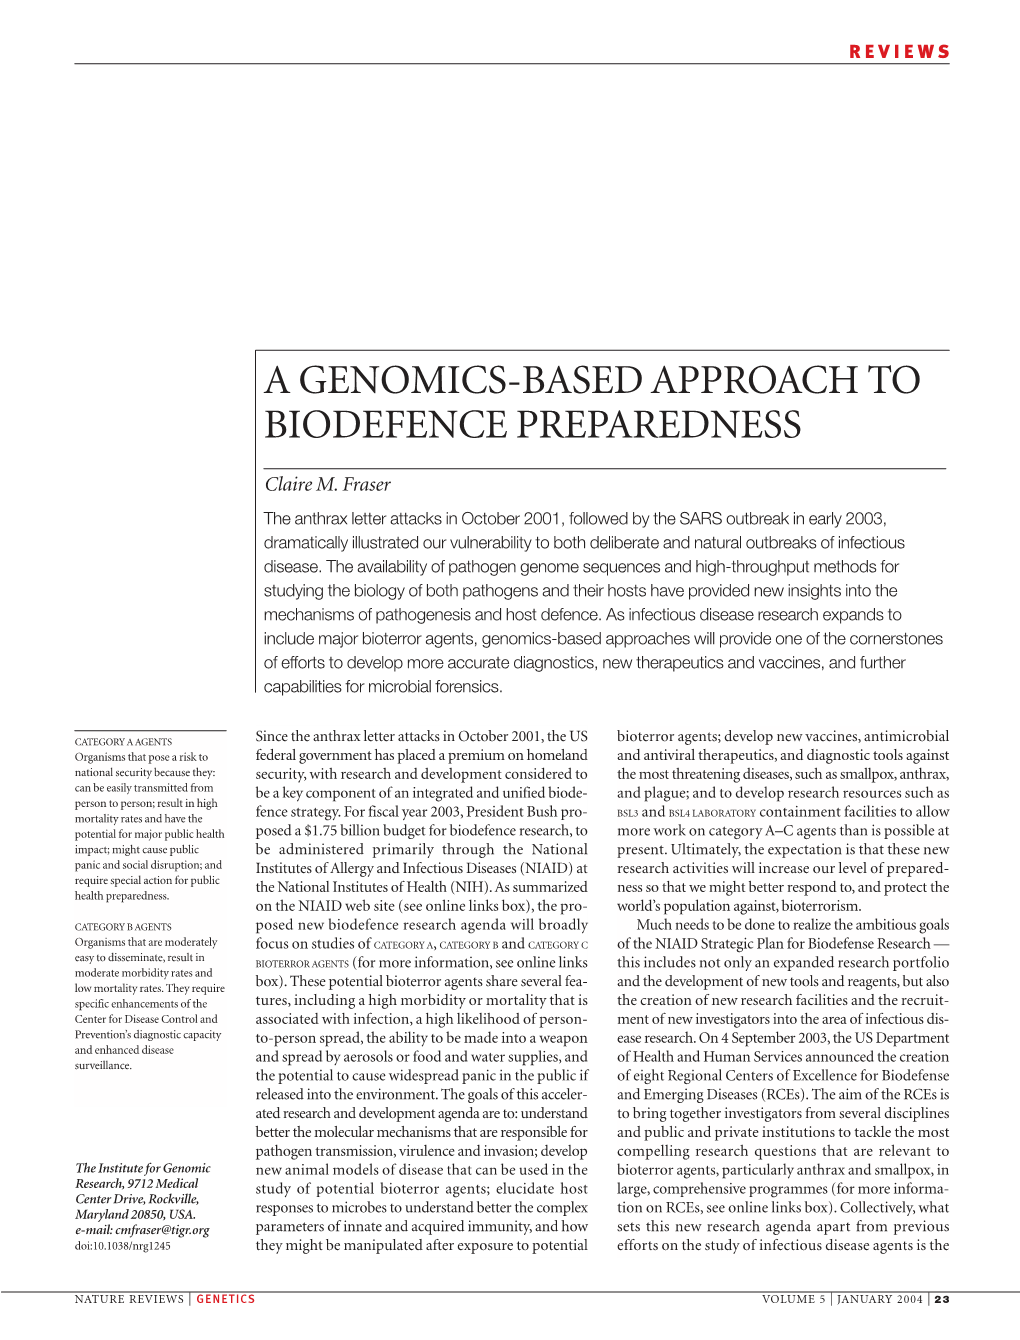 A Genomics-Based Approach to Biodefence Preparedness